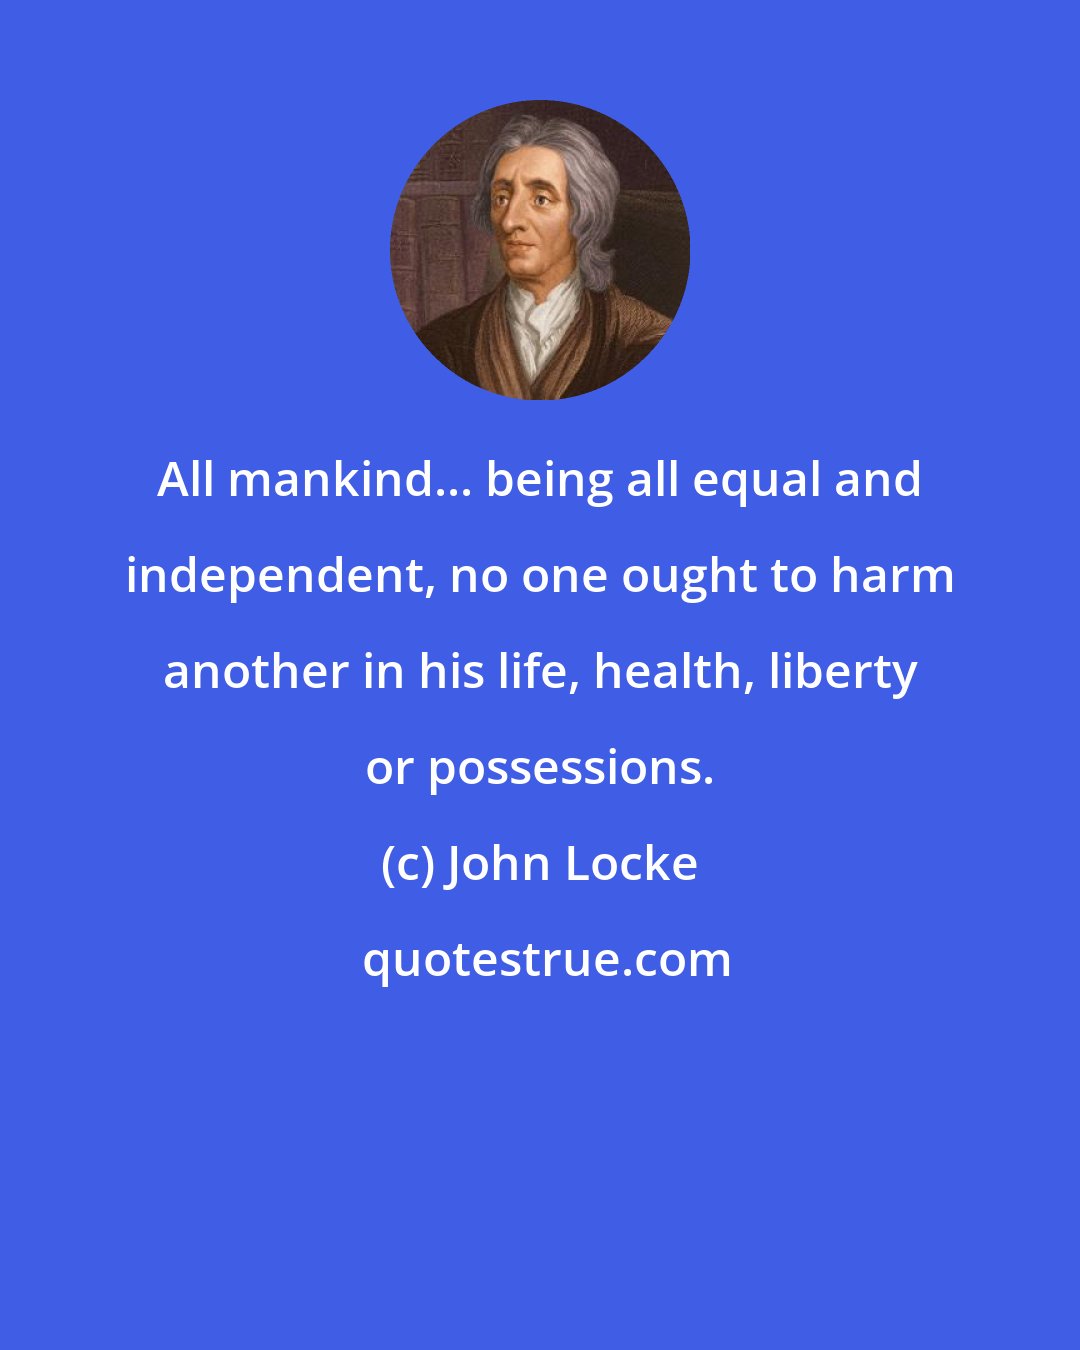 John Locke: All mankind... being all equal and independent, no one ought to harm another in his life, health, liberty or possessions.